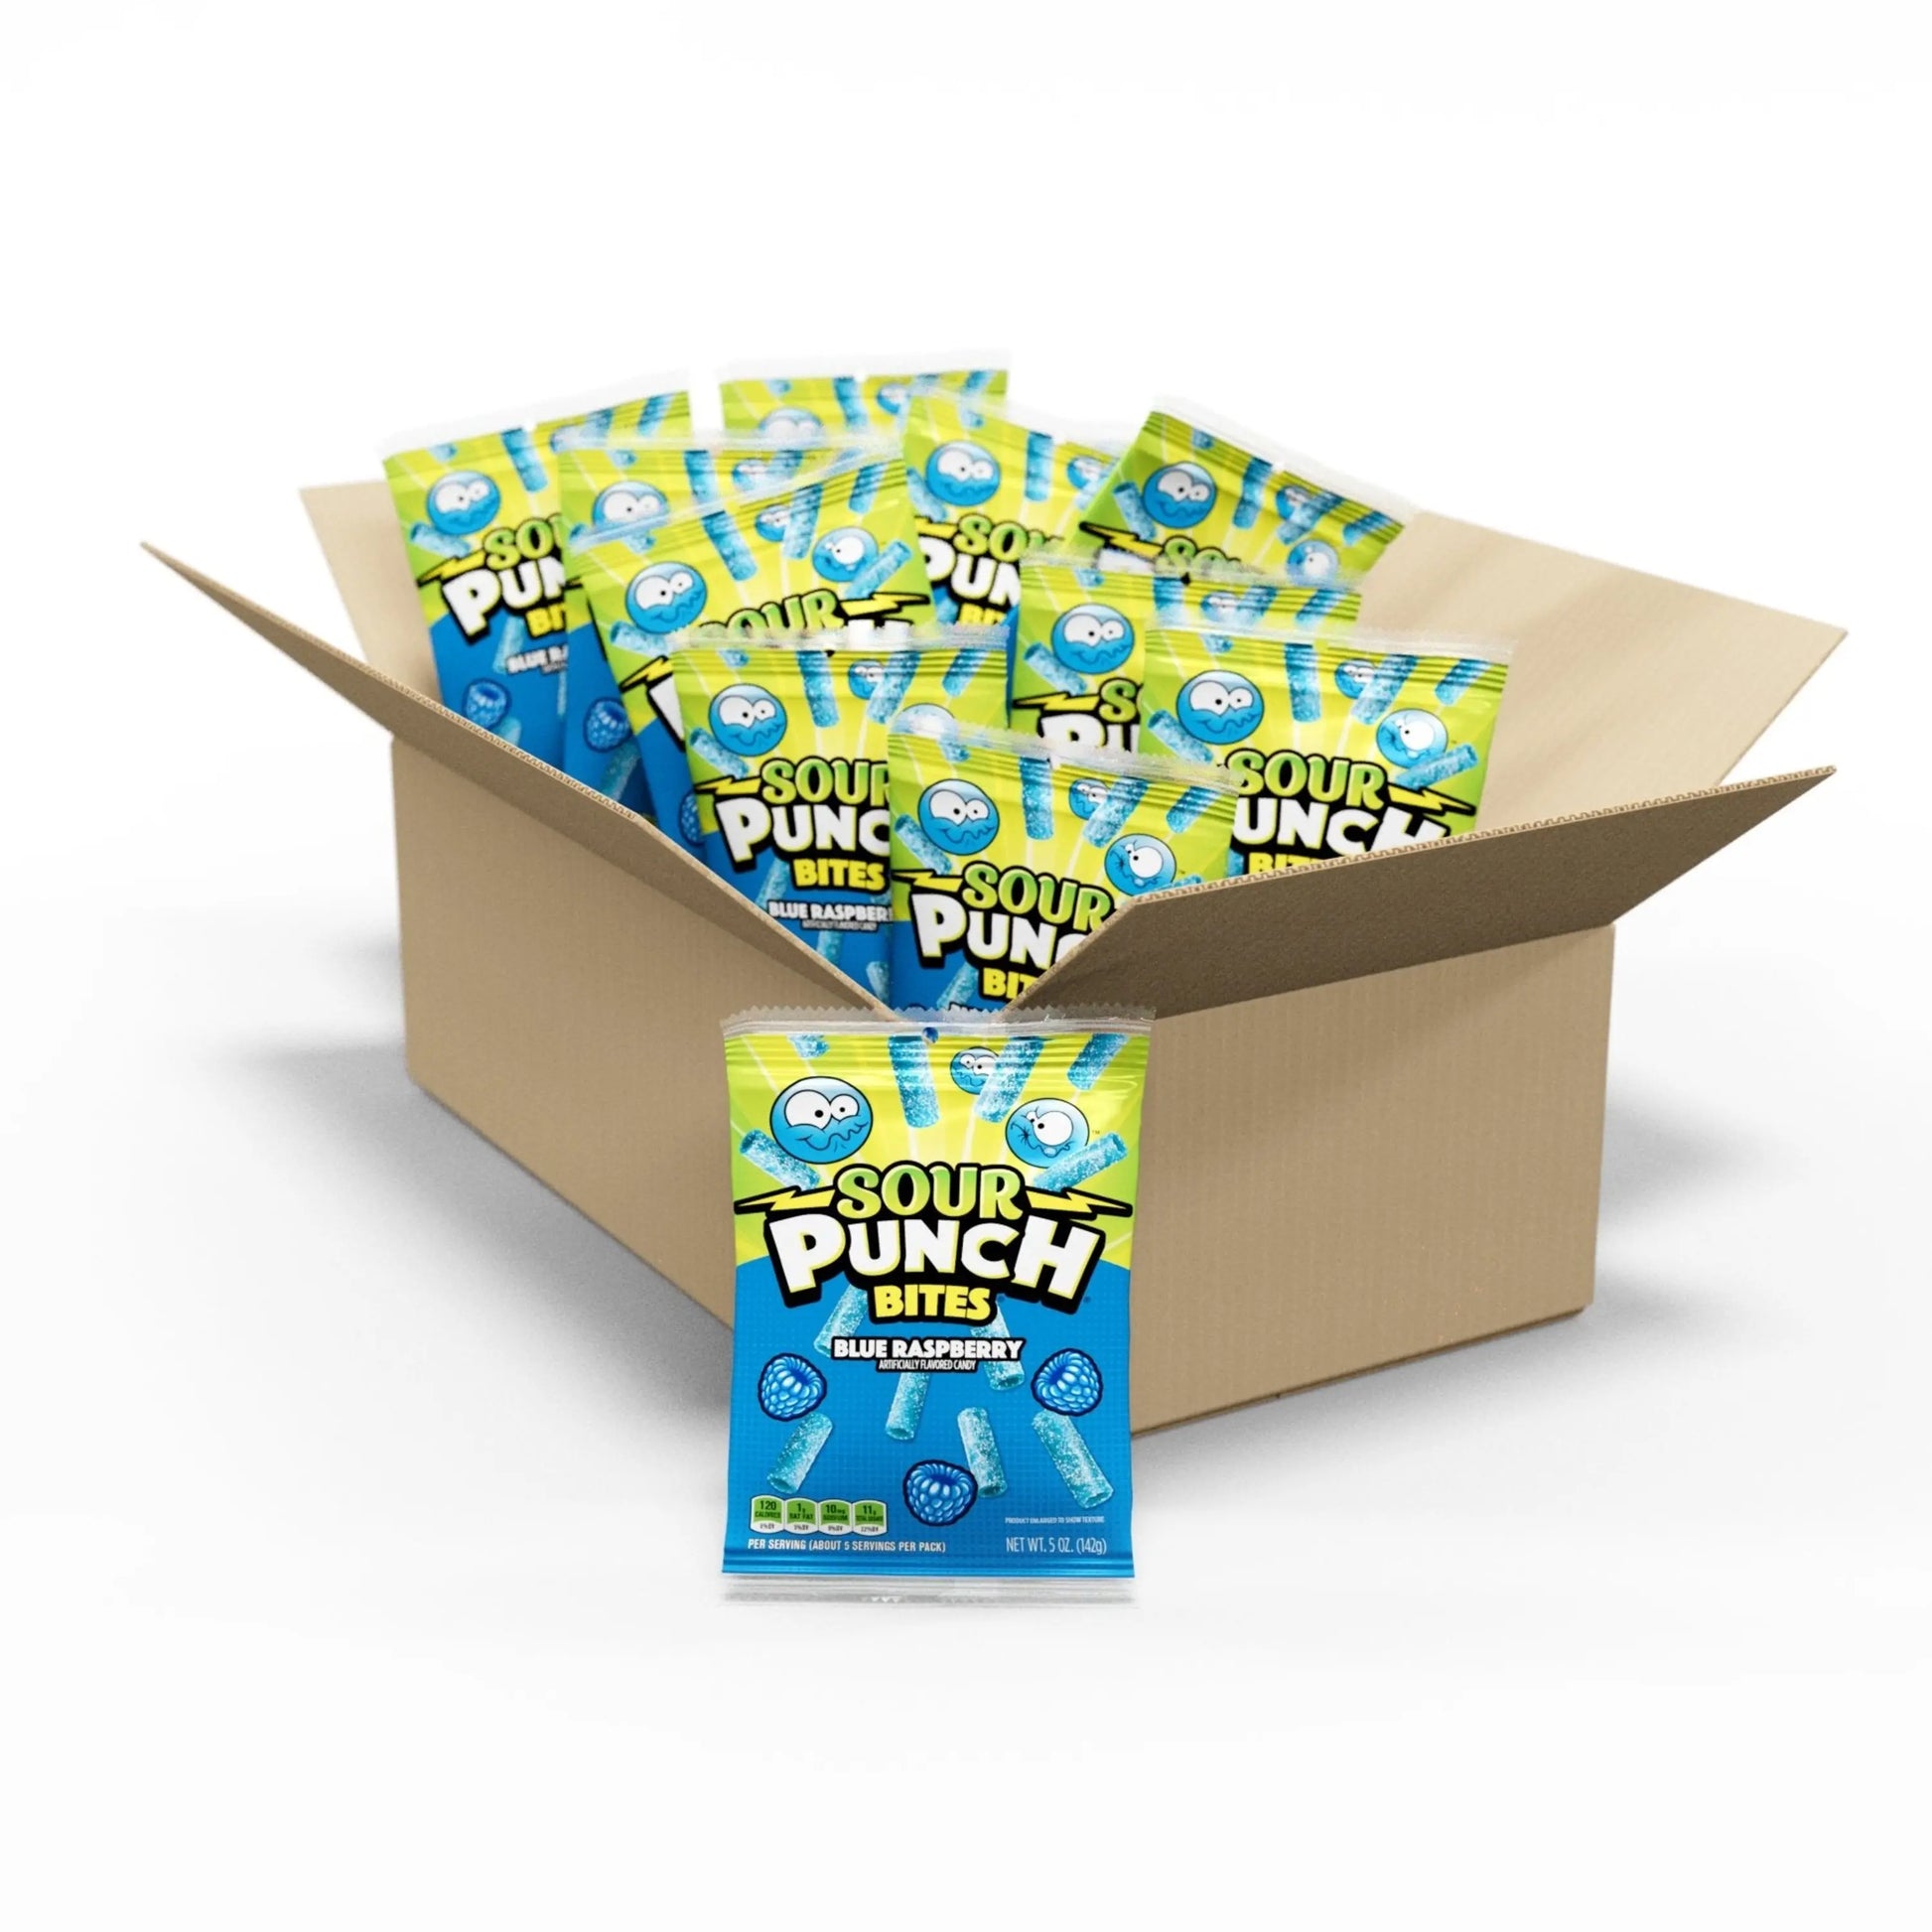 12 count box of Sour Punch Bites Blue Raspberry Candy 5oz bags